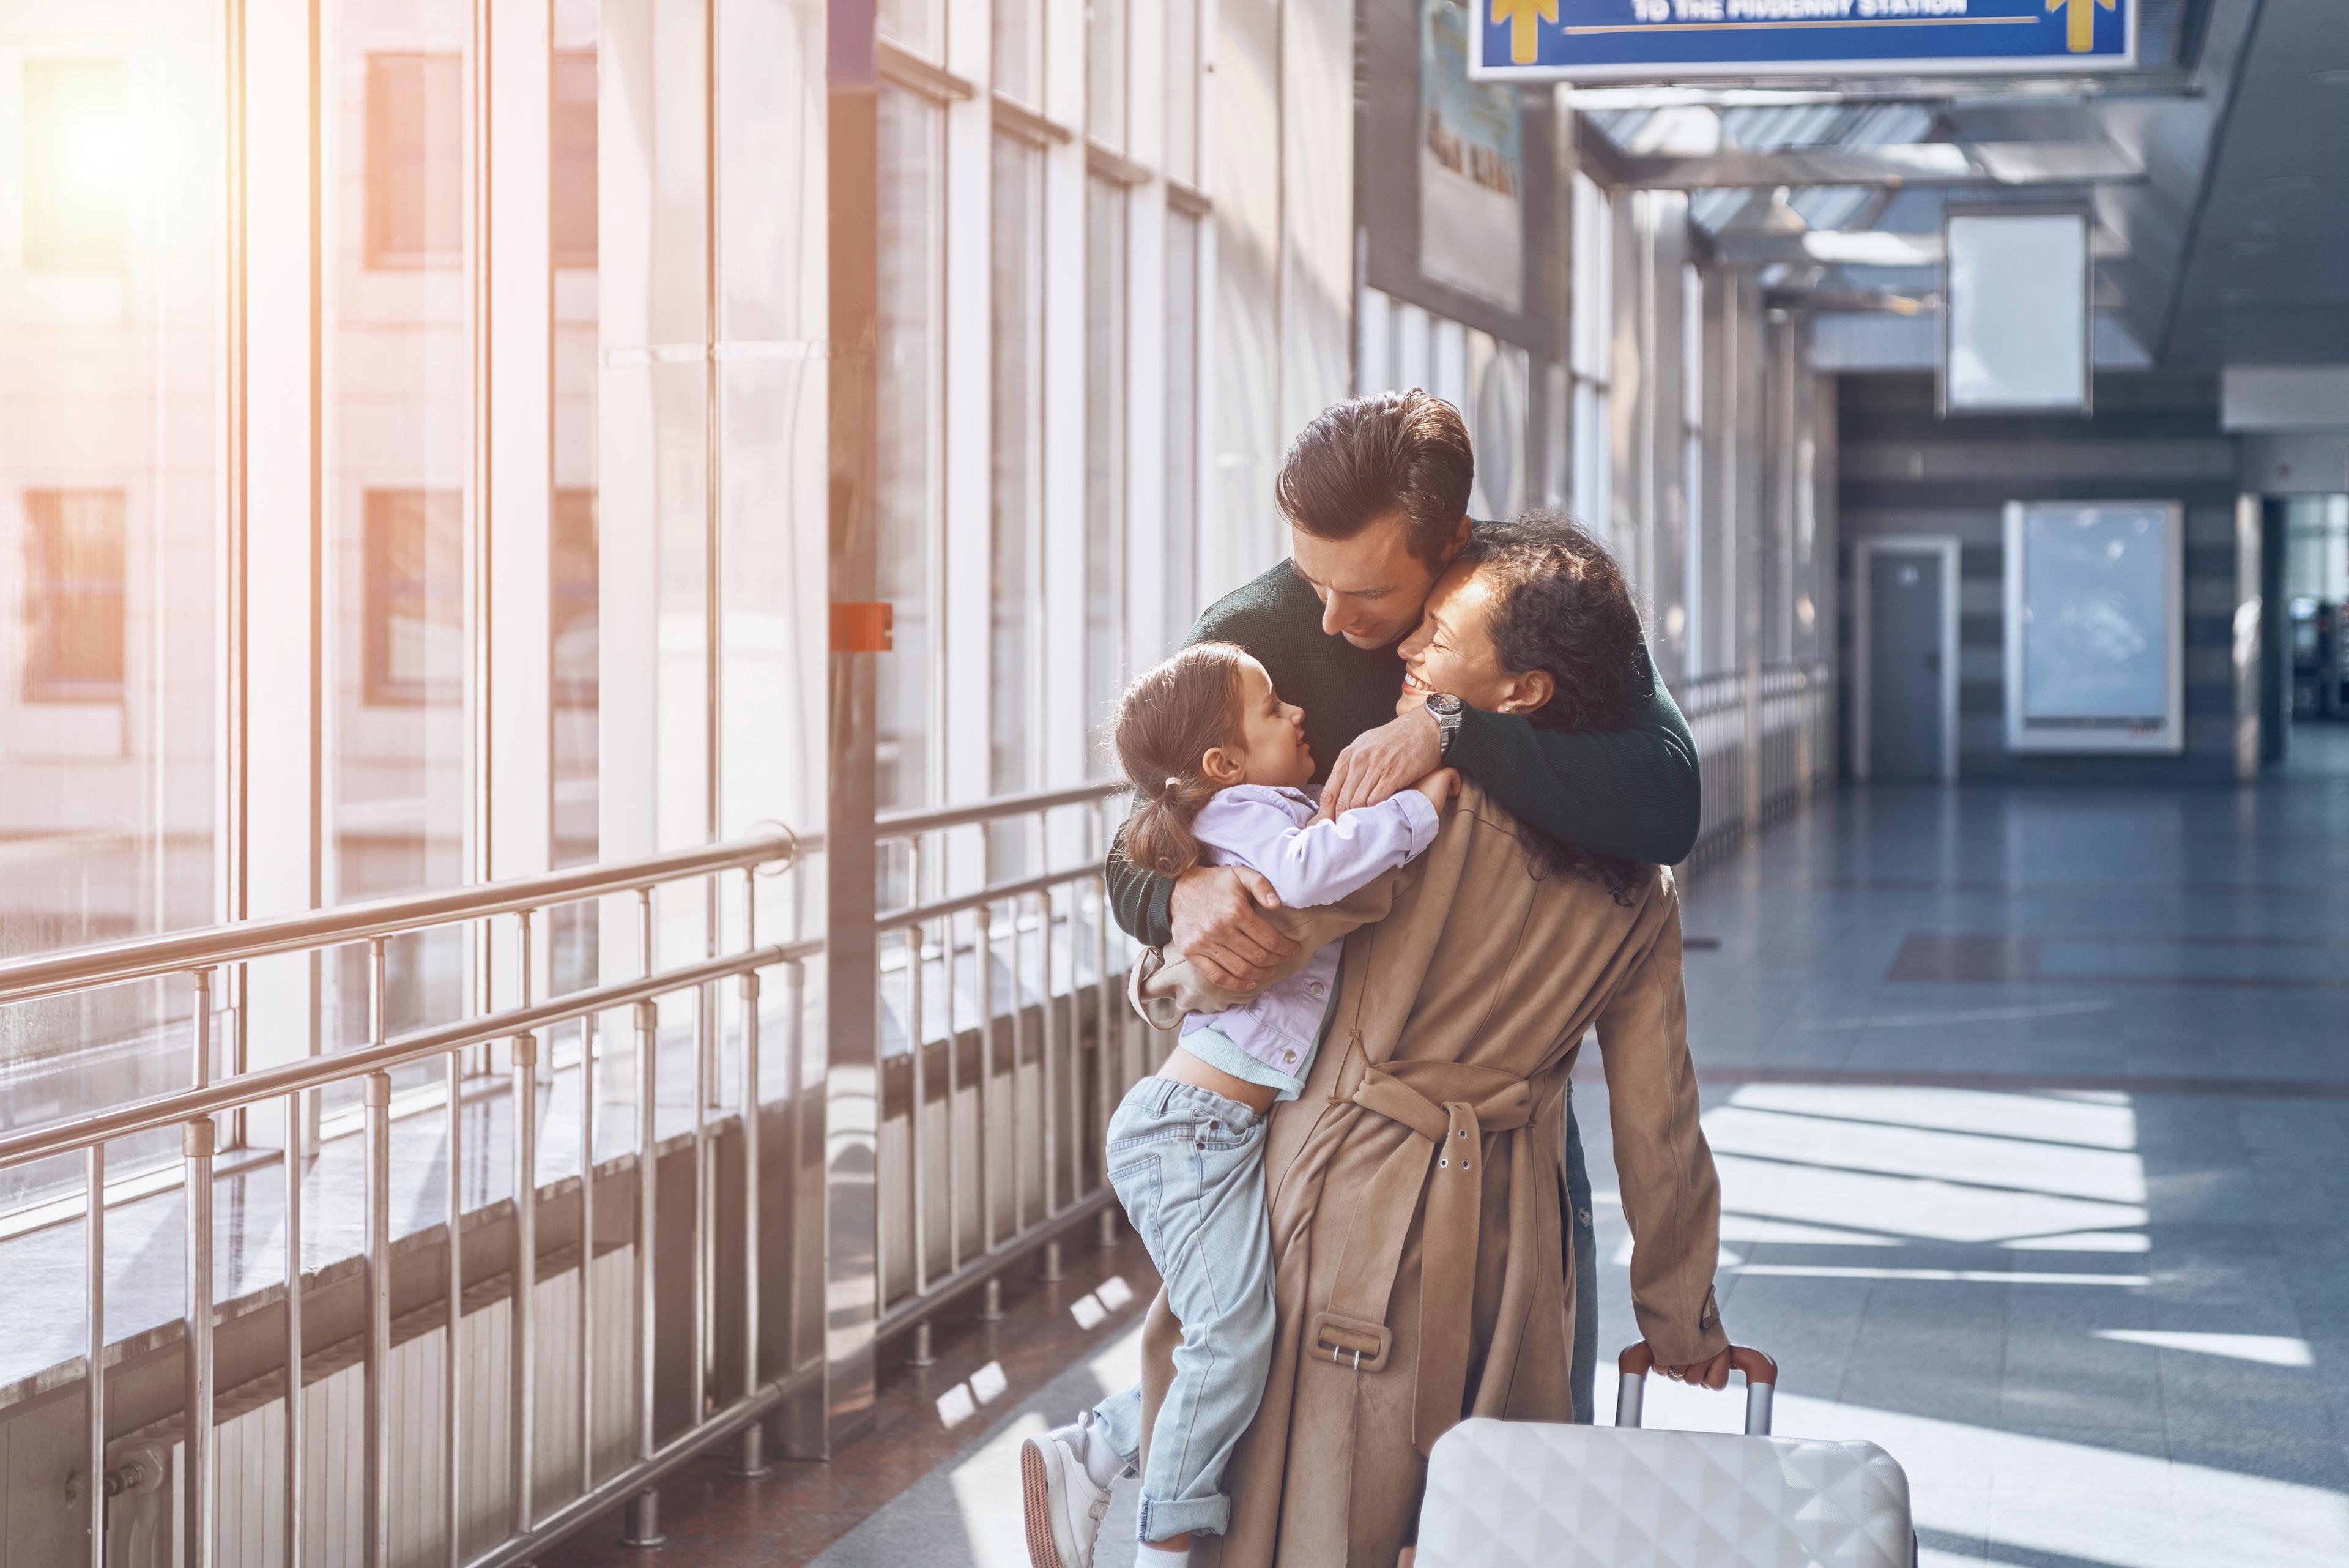 Passengers warmly greeting each other at an airport, symbolizing the positive and secure experience of air travel, thanks to the remarkable safety achievements in the aerospace industry